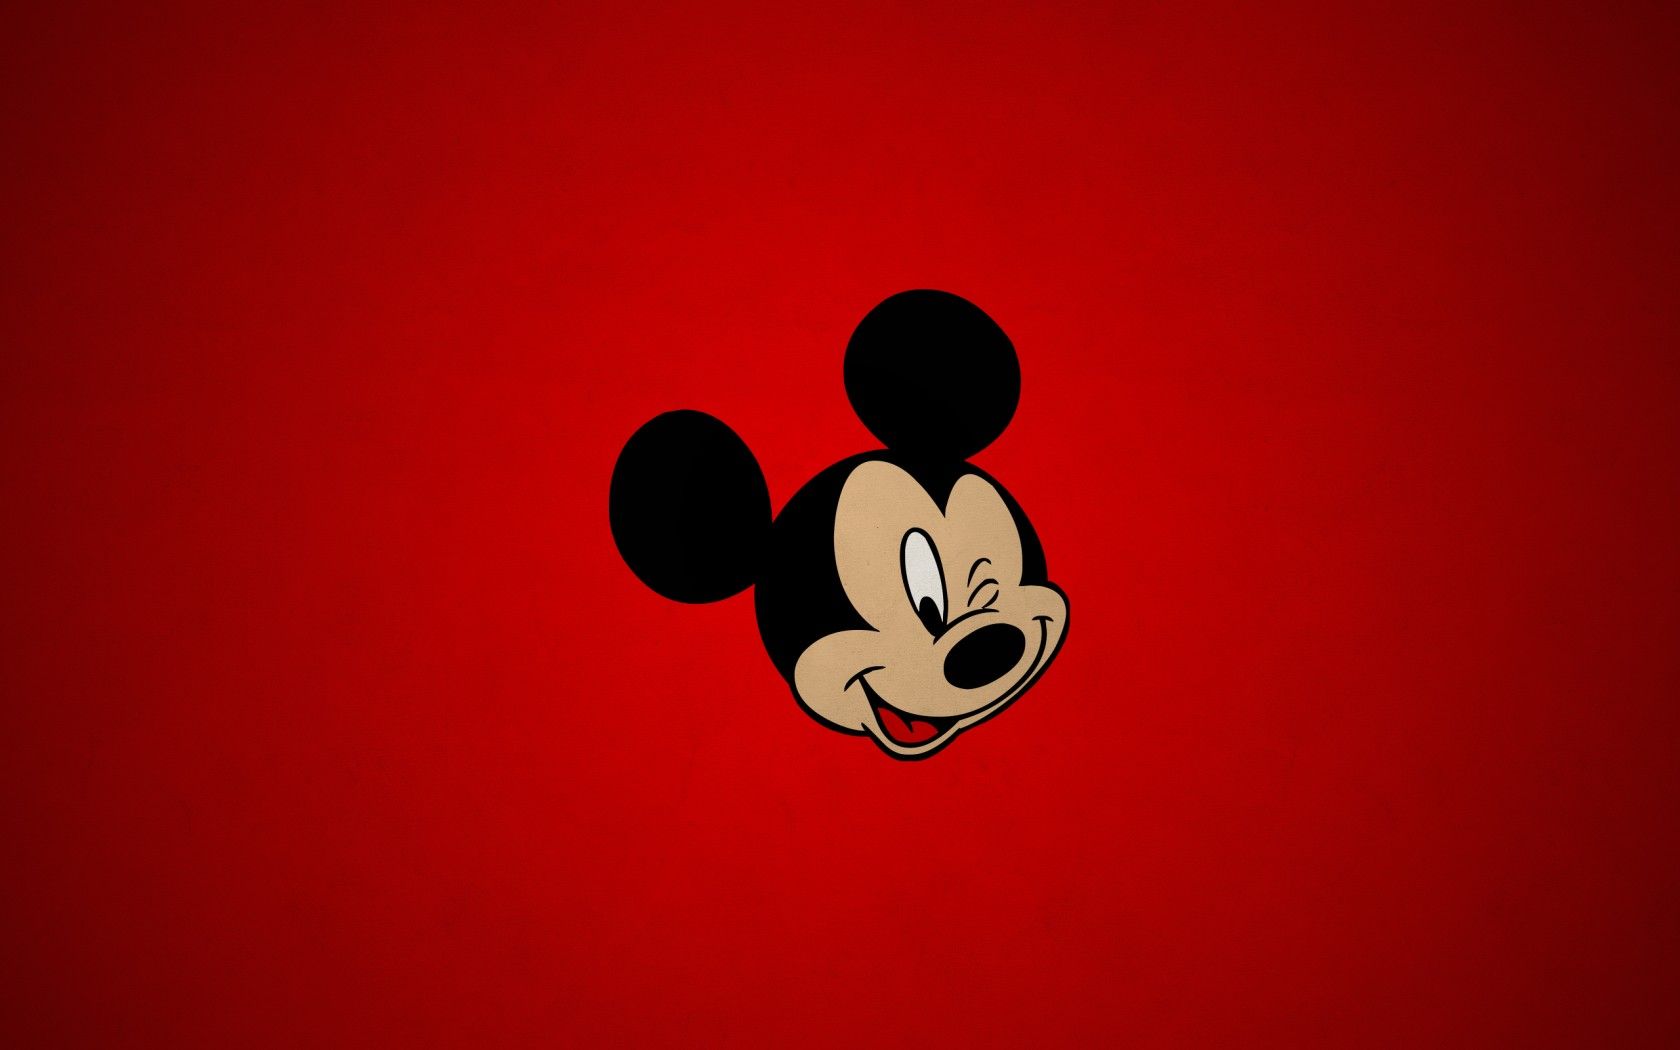 Mickey Mouse wallpaper for desktop and mobiles - Mickey Mouse